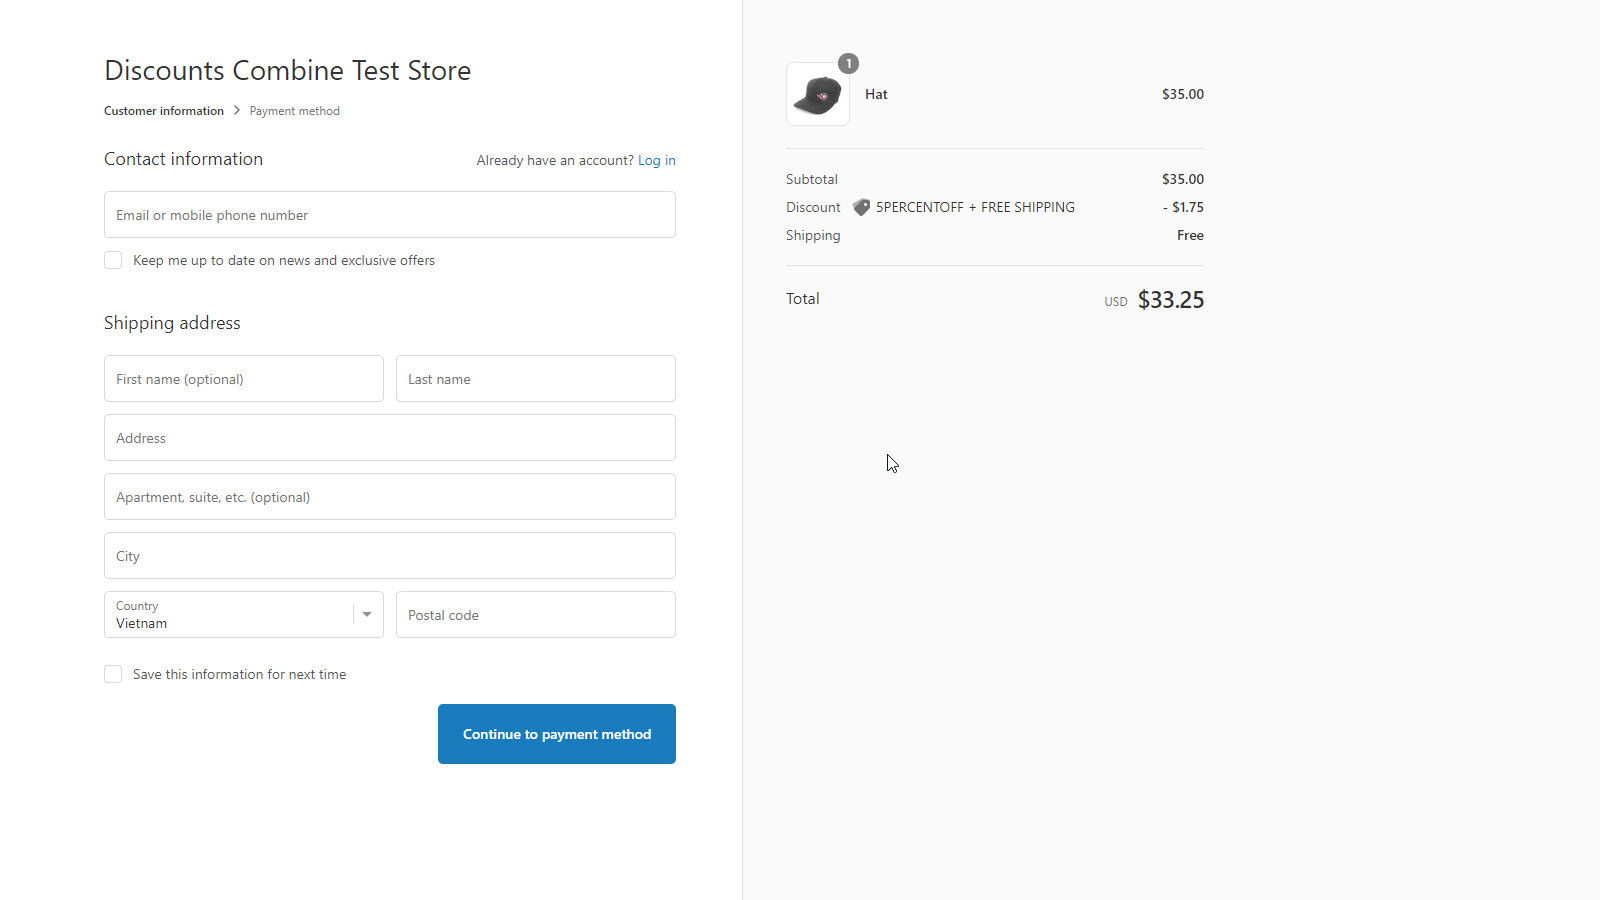 App work on checkout page 1